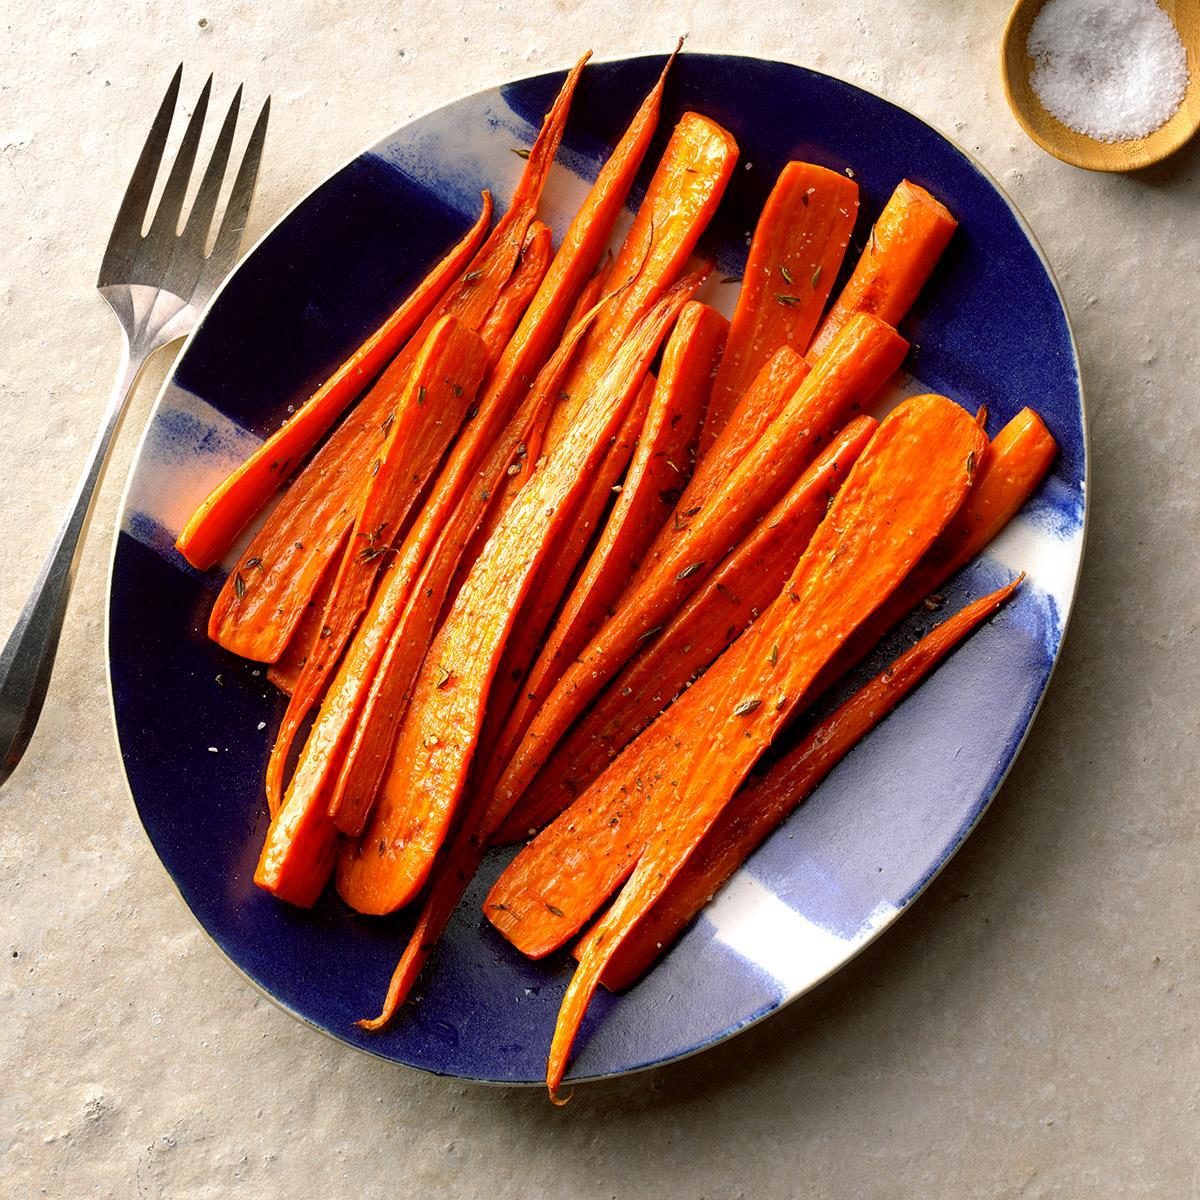 Roasted Carrots with Thyme EXPS SSCBZ18 178887 B08 30 1b 1